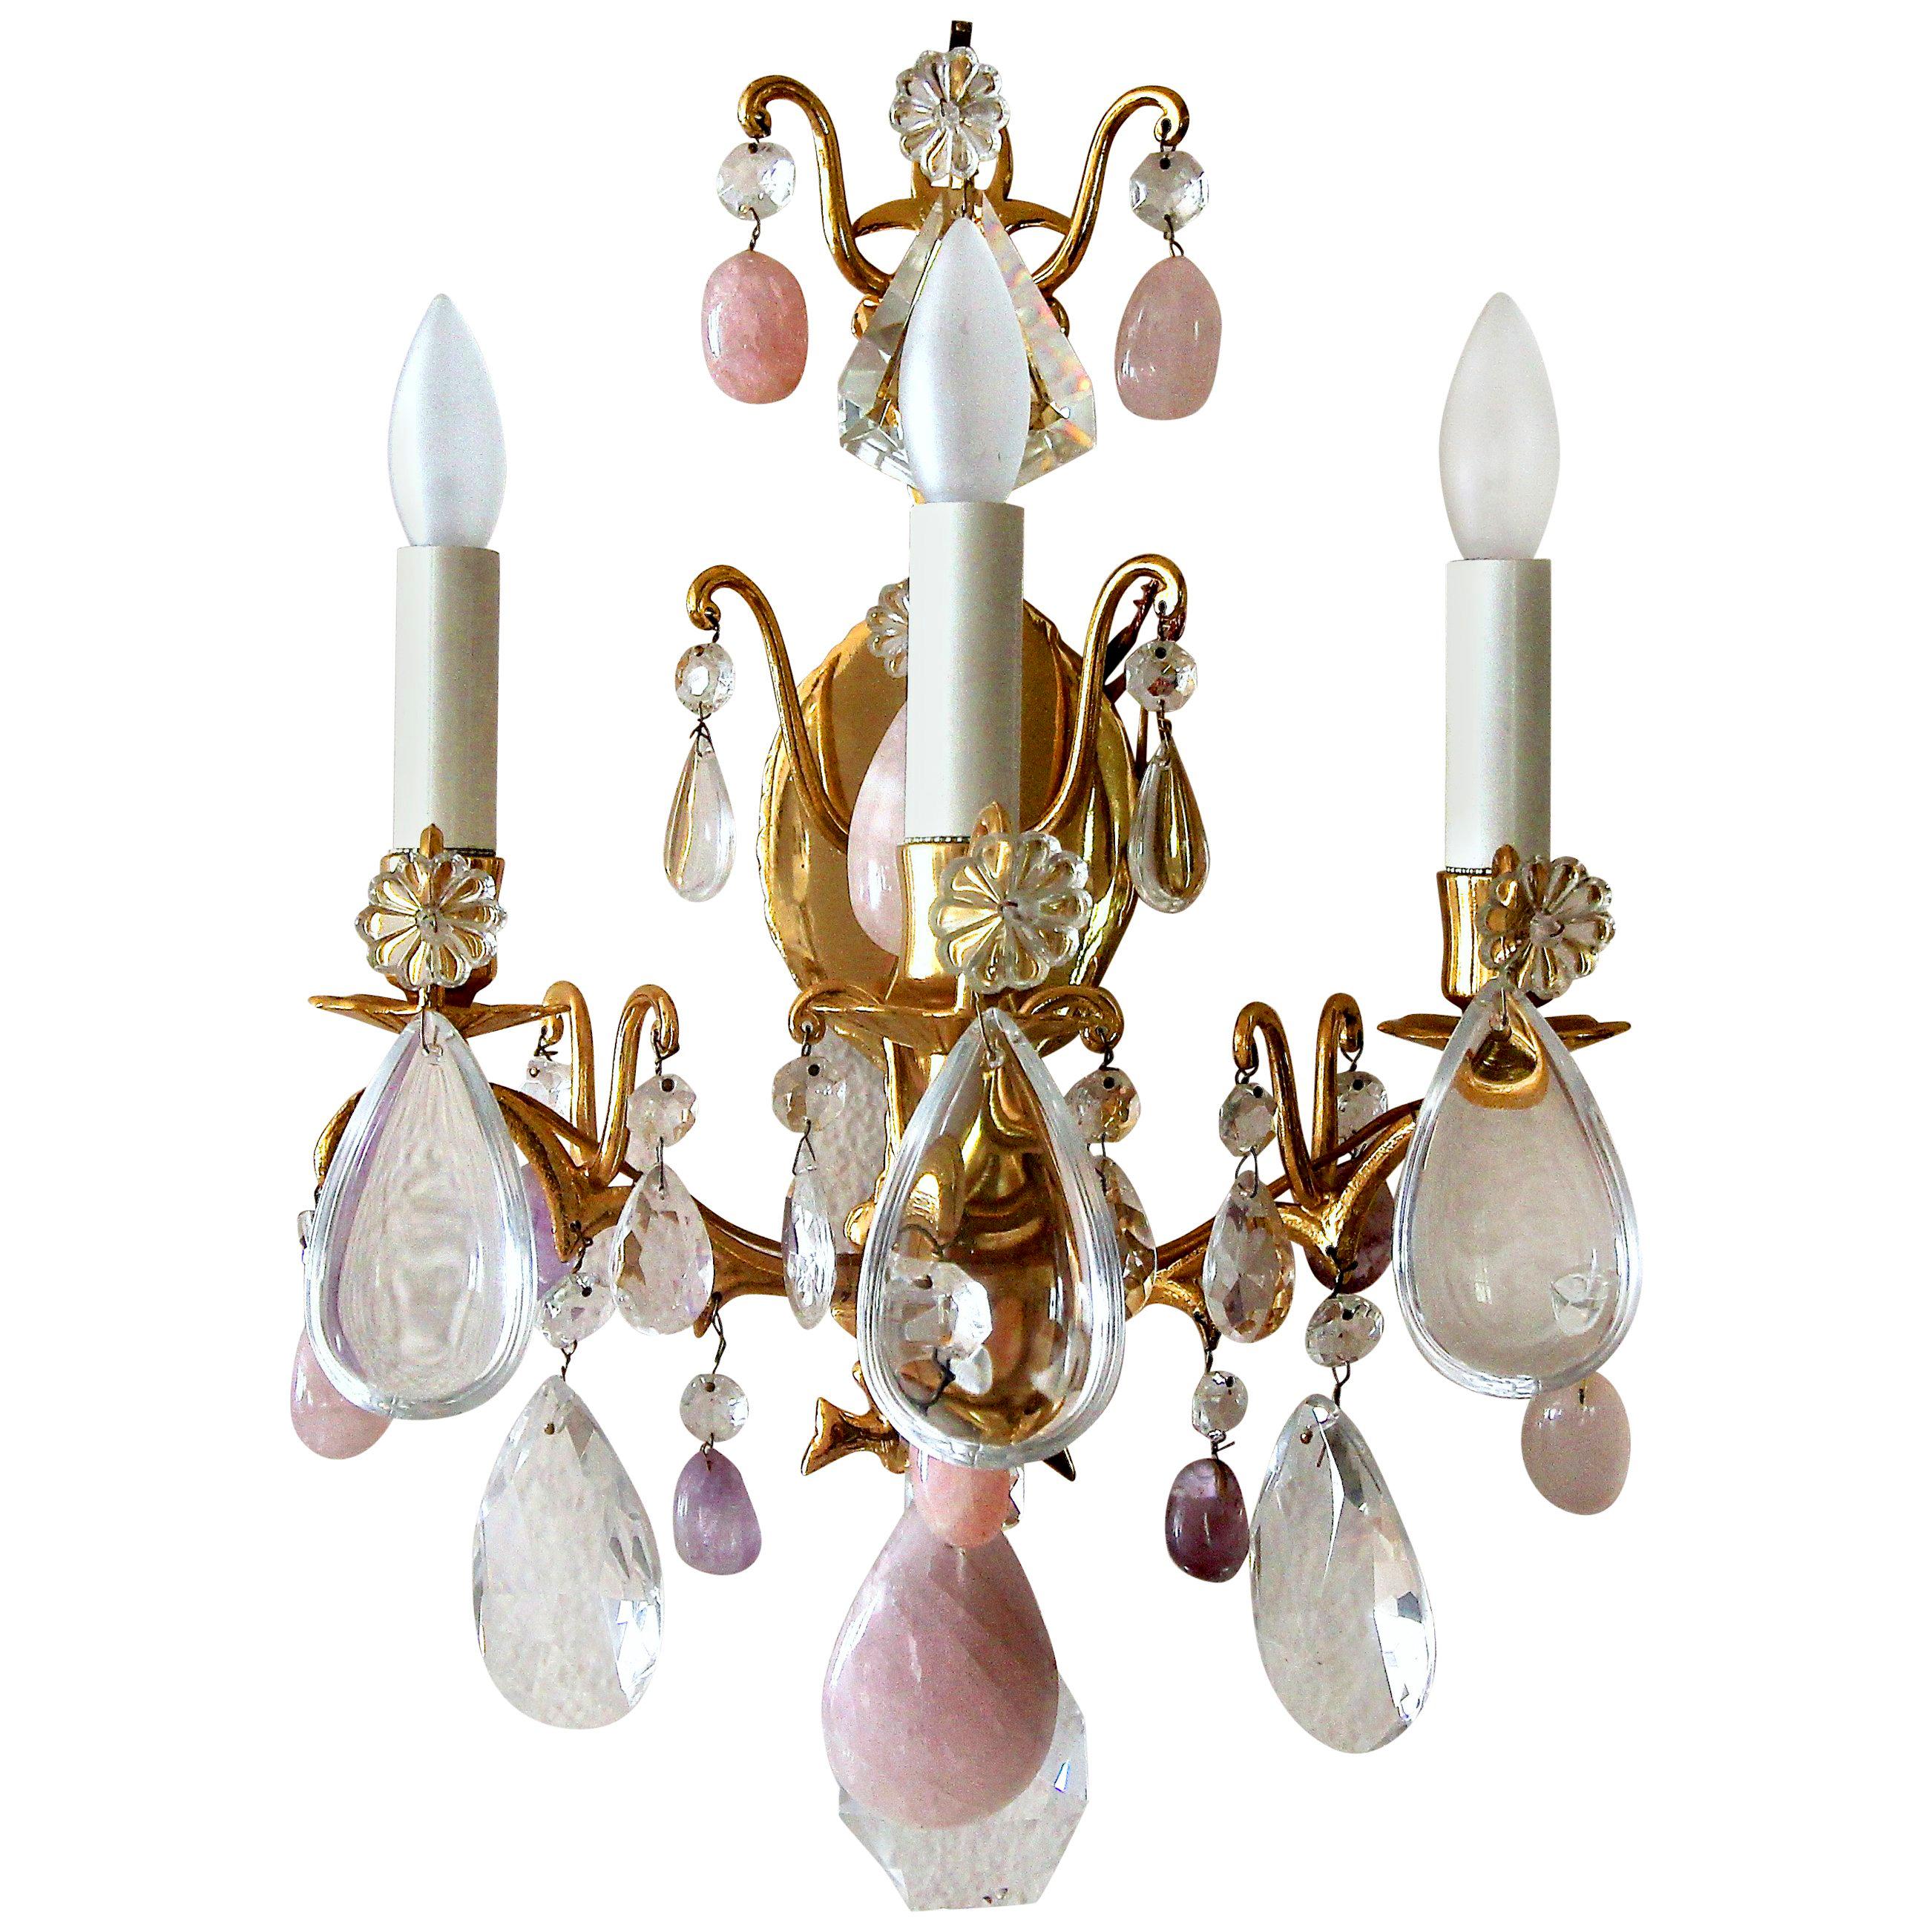 Pair of French Louis XV Style Rock Crystal and Brass Wall Light Sconces